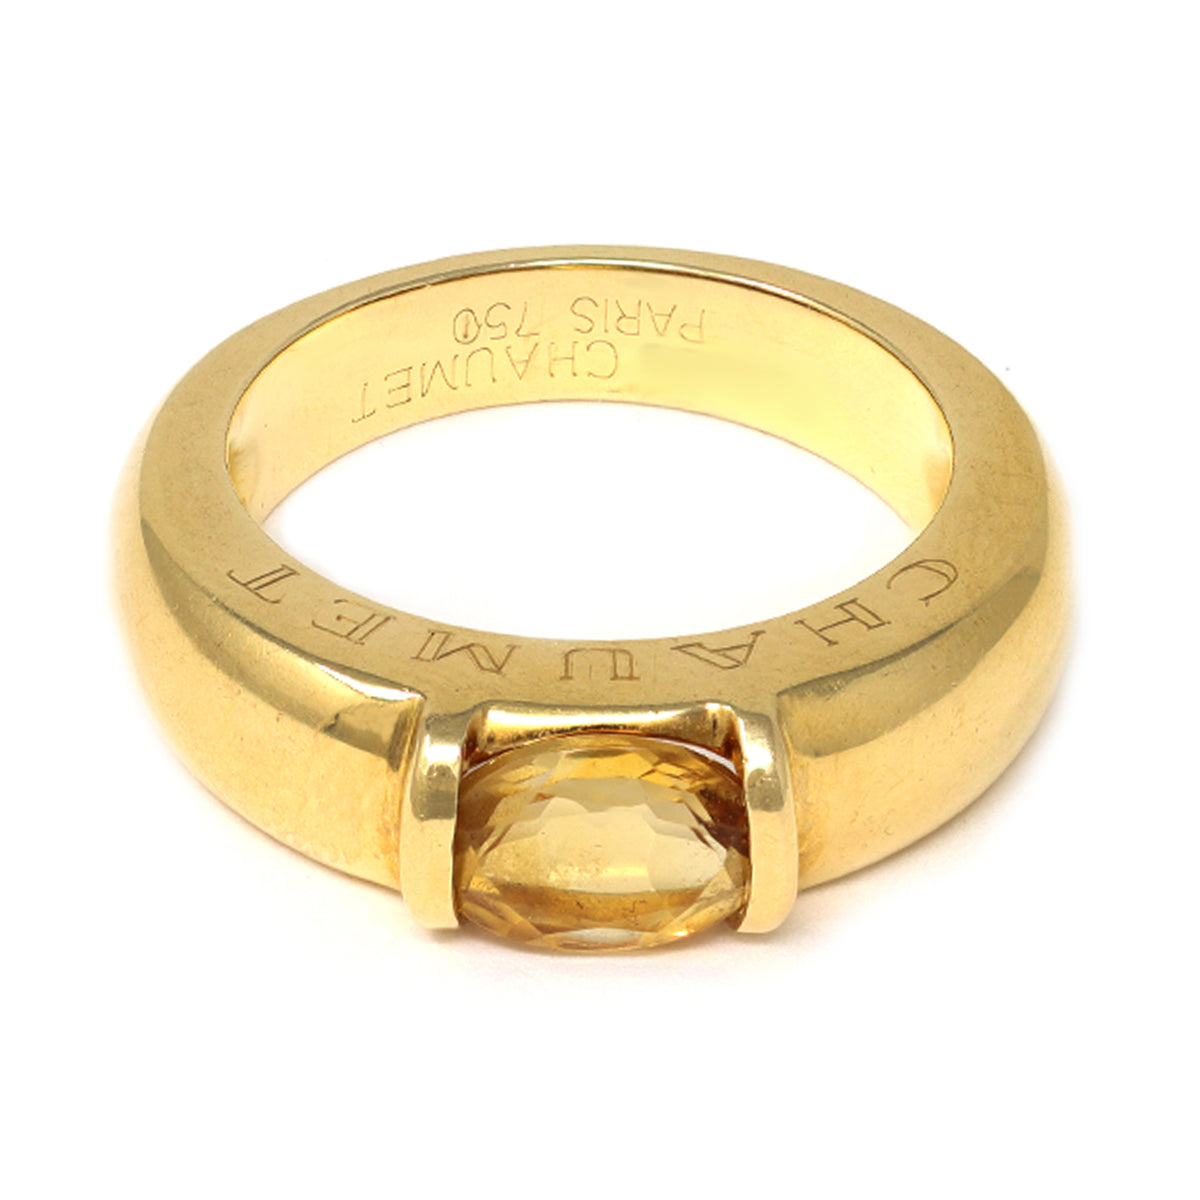 Signed Chaumet Paris Citrine Ring in 18k makers mark view